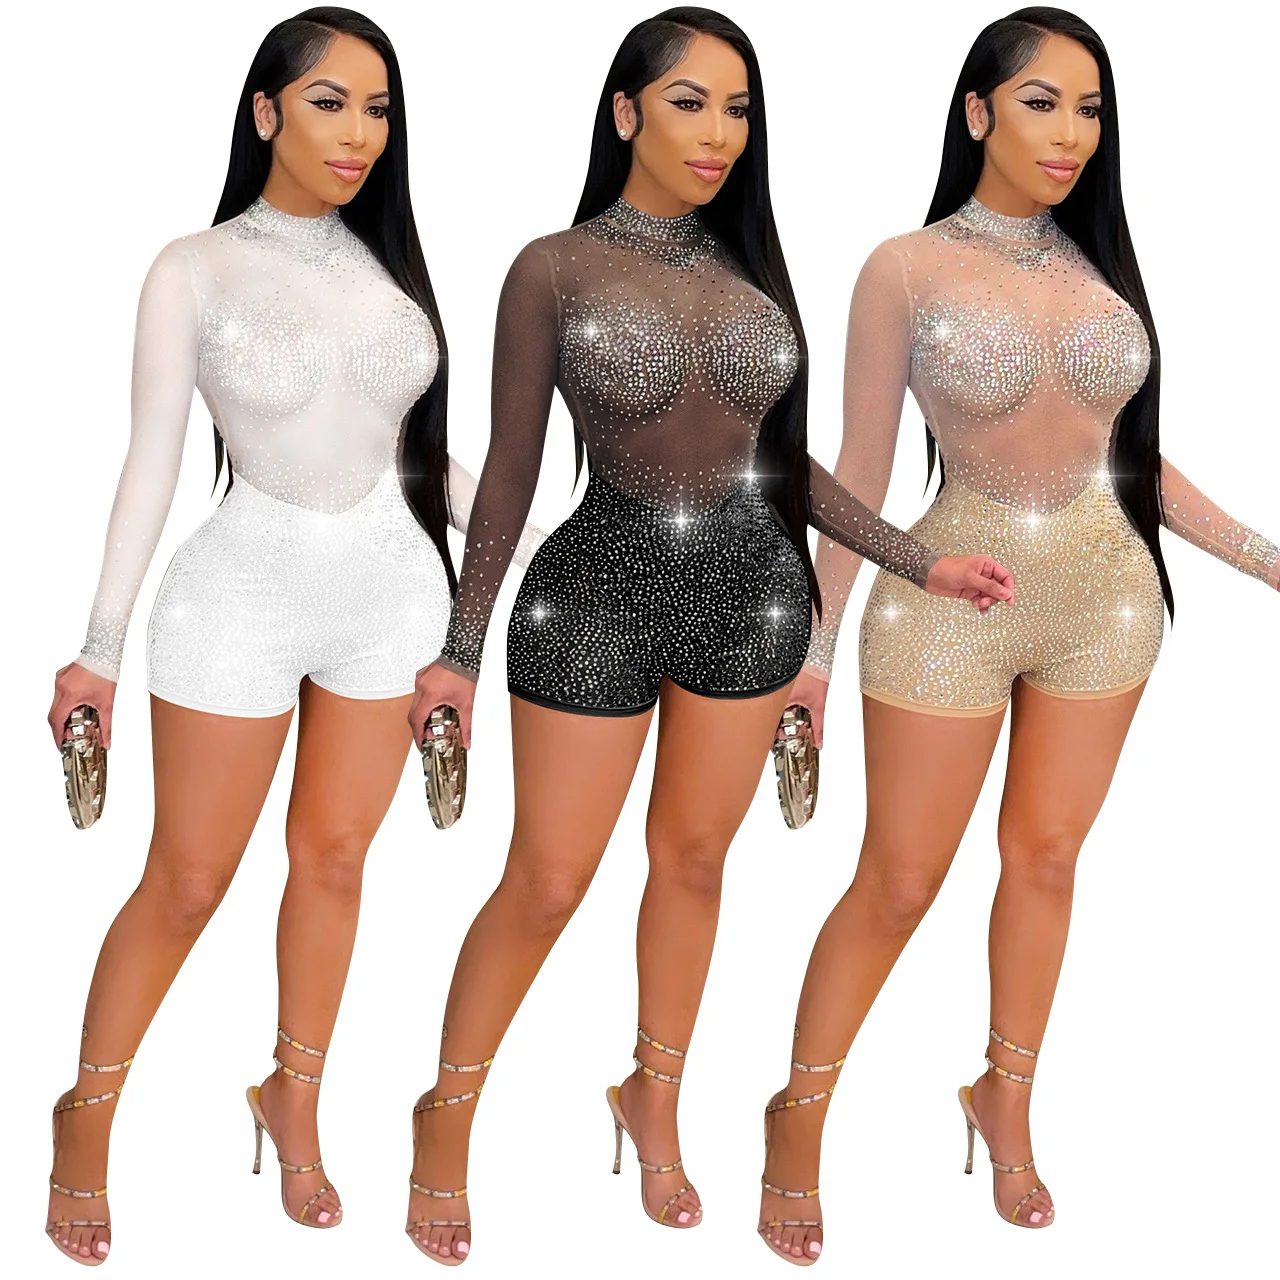 

Diamonds Shorts See Through Night Party Club Solid Sheer Mesh Hot Drilling Skinny Romper Playsuit Sexy Jumpsuit Outfit Overalls